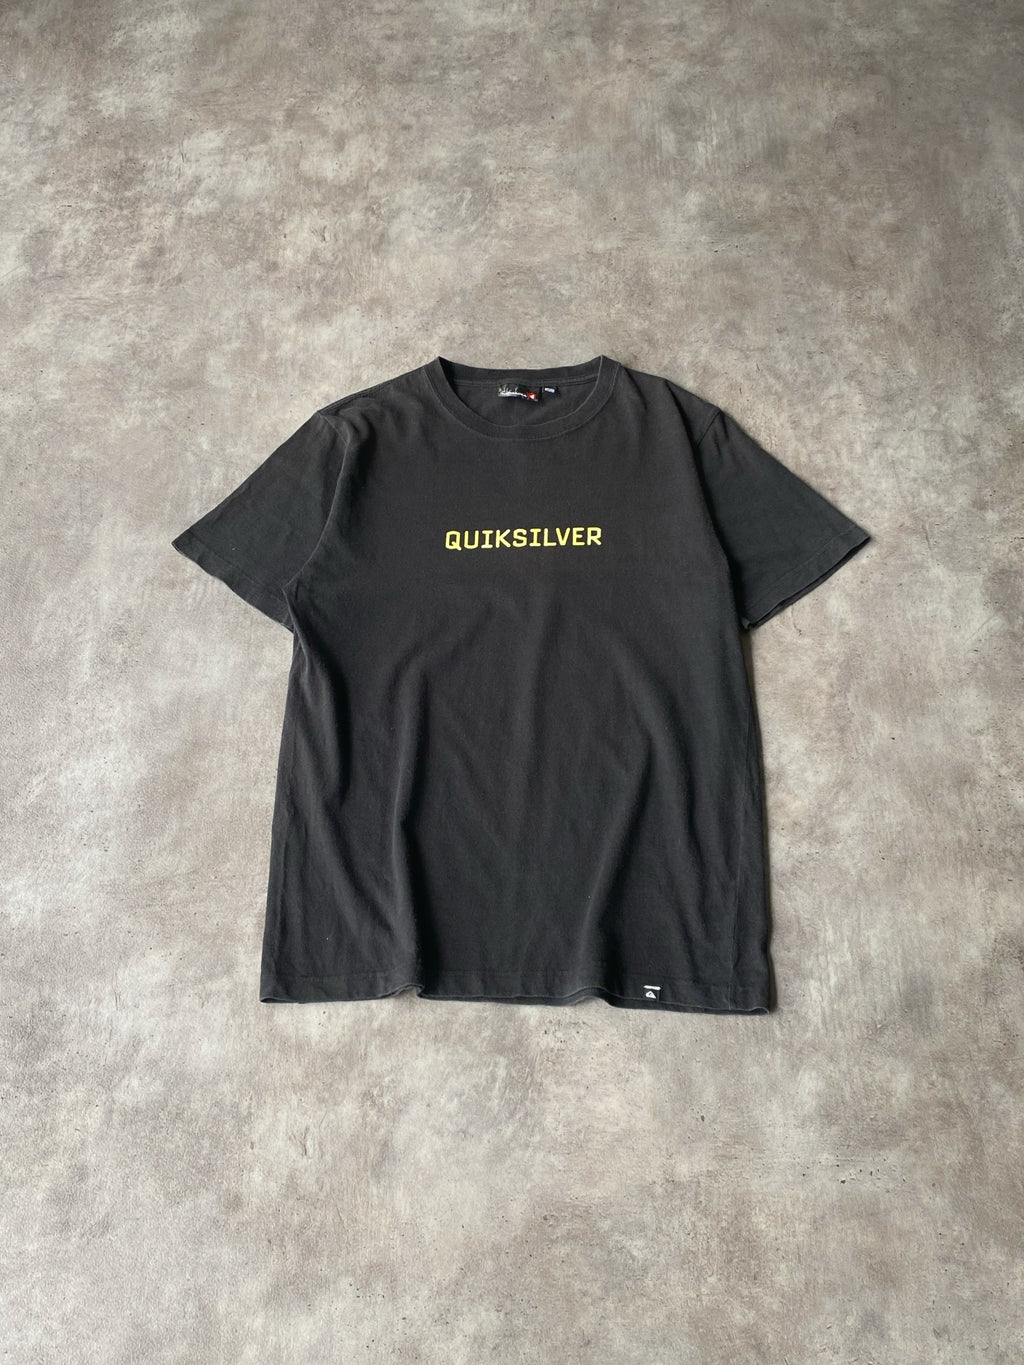 Y2K Quiksilver Spellout Surf Tee - M